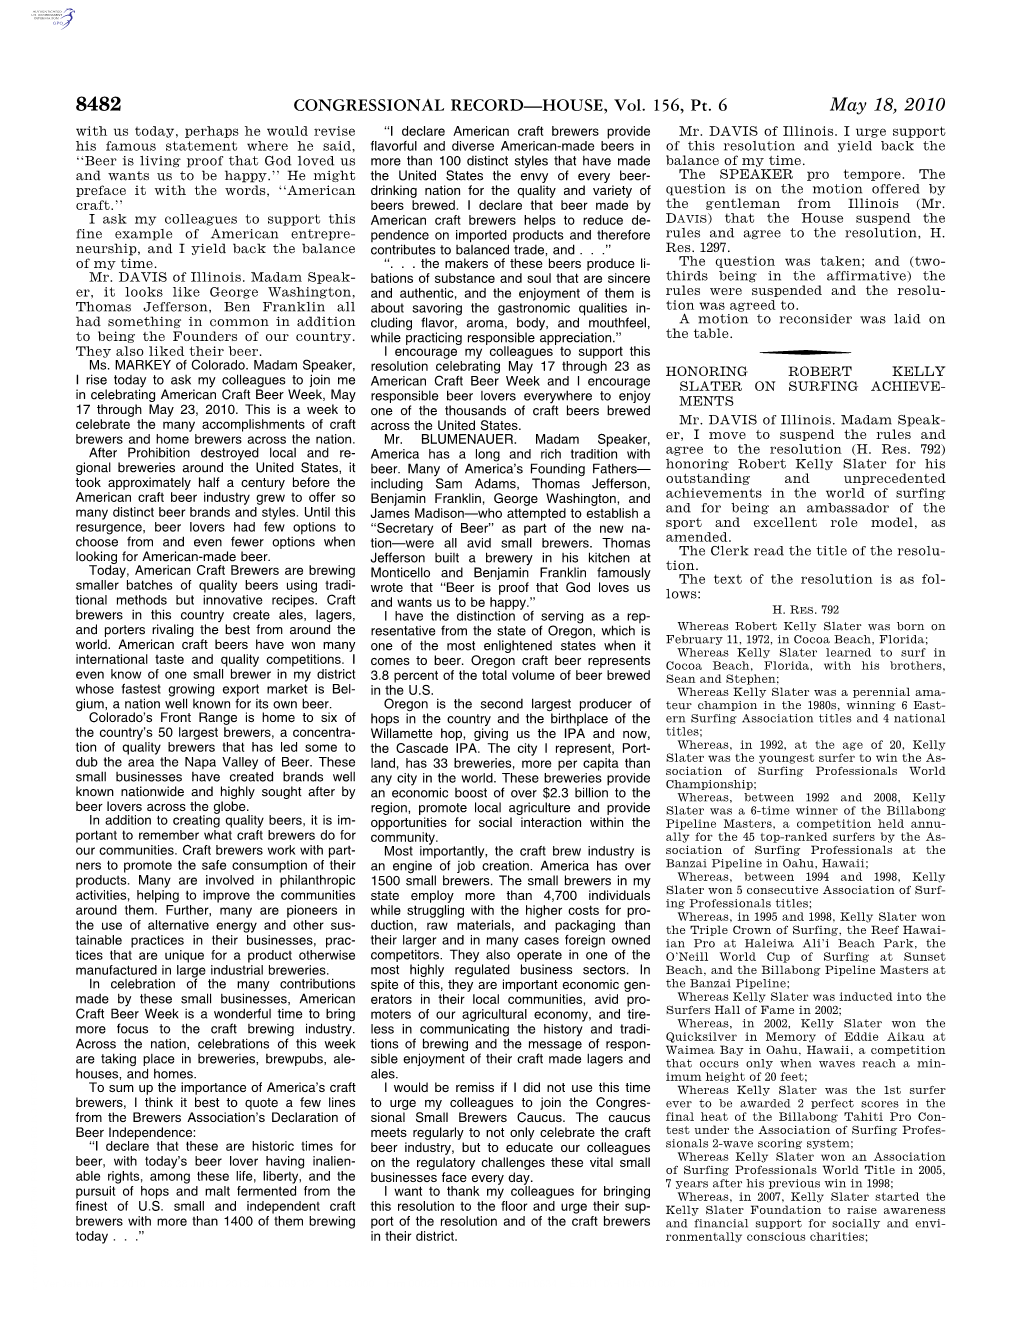 CONGRESSIONAL RECORD—HOUSE, Vol. 156, Pt. 6 May 18, 2010 with Us Today, Perhaps He Would Revise ‘‘I Declare American Craft Brewers Provide Mr